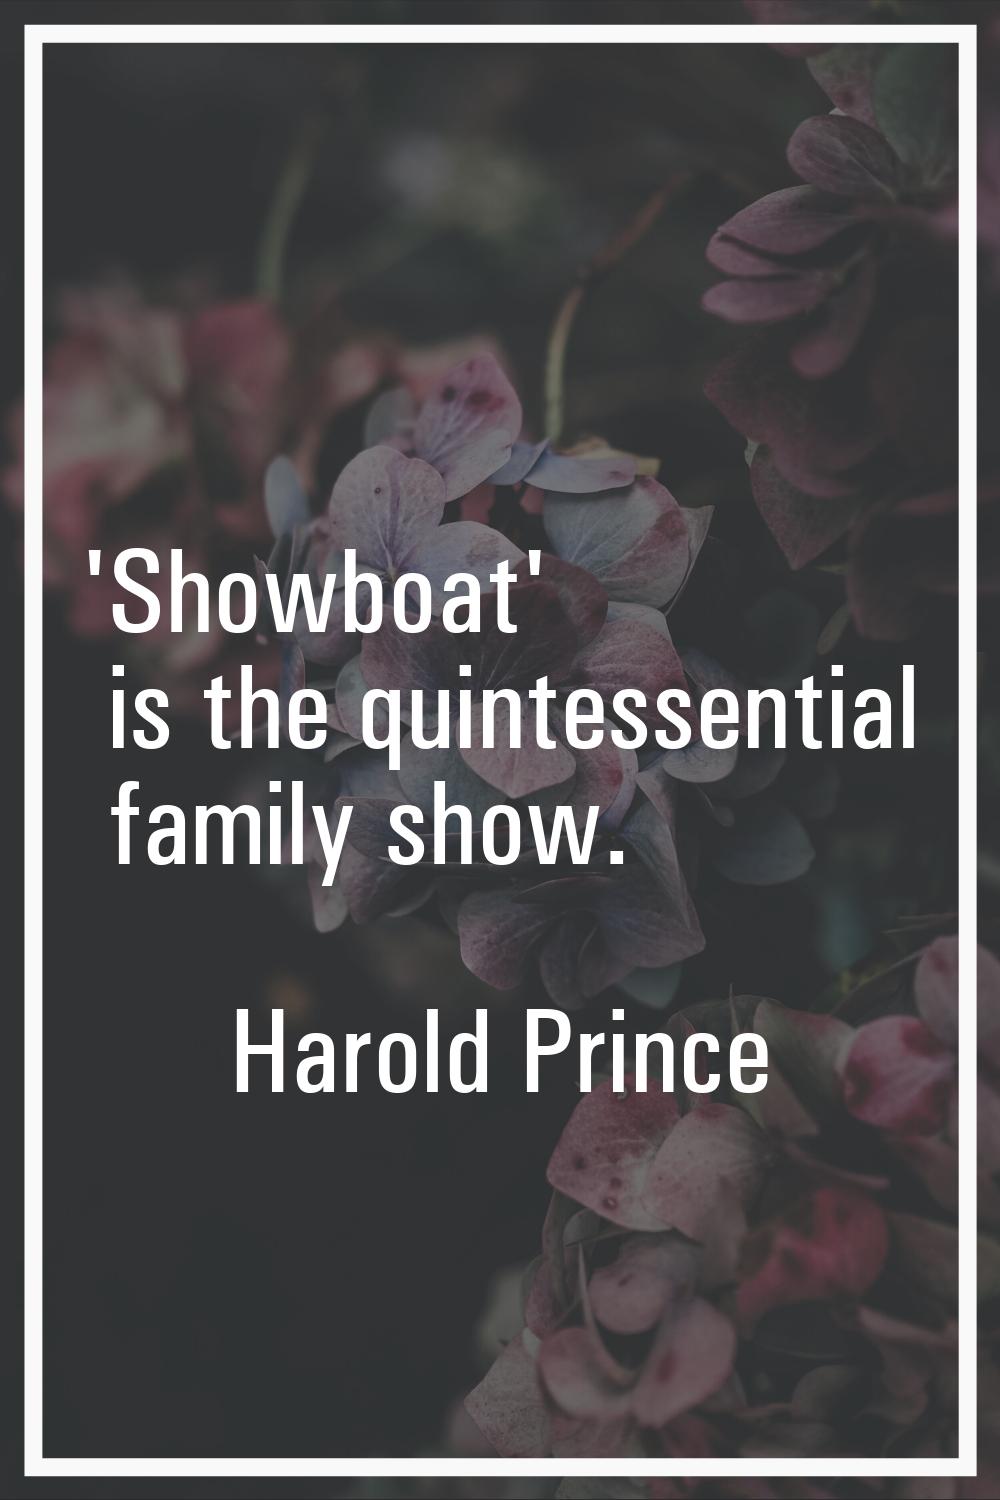 'Showboat' is the quintessential family show.